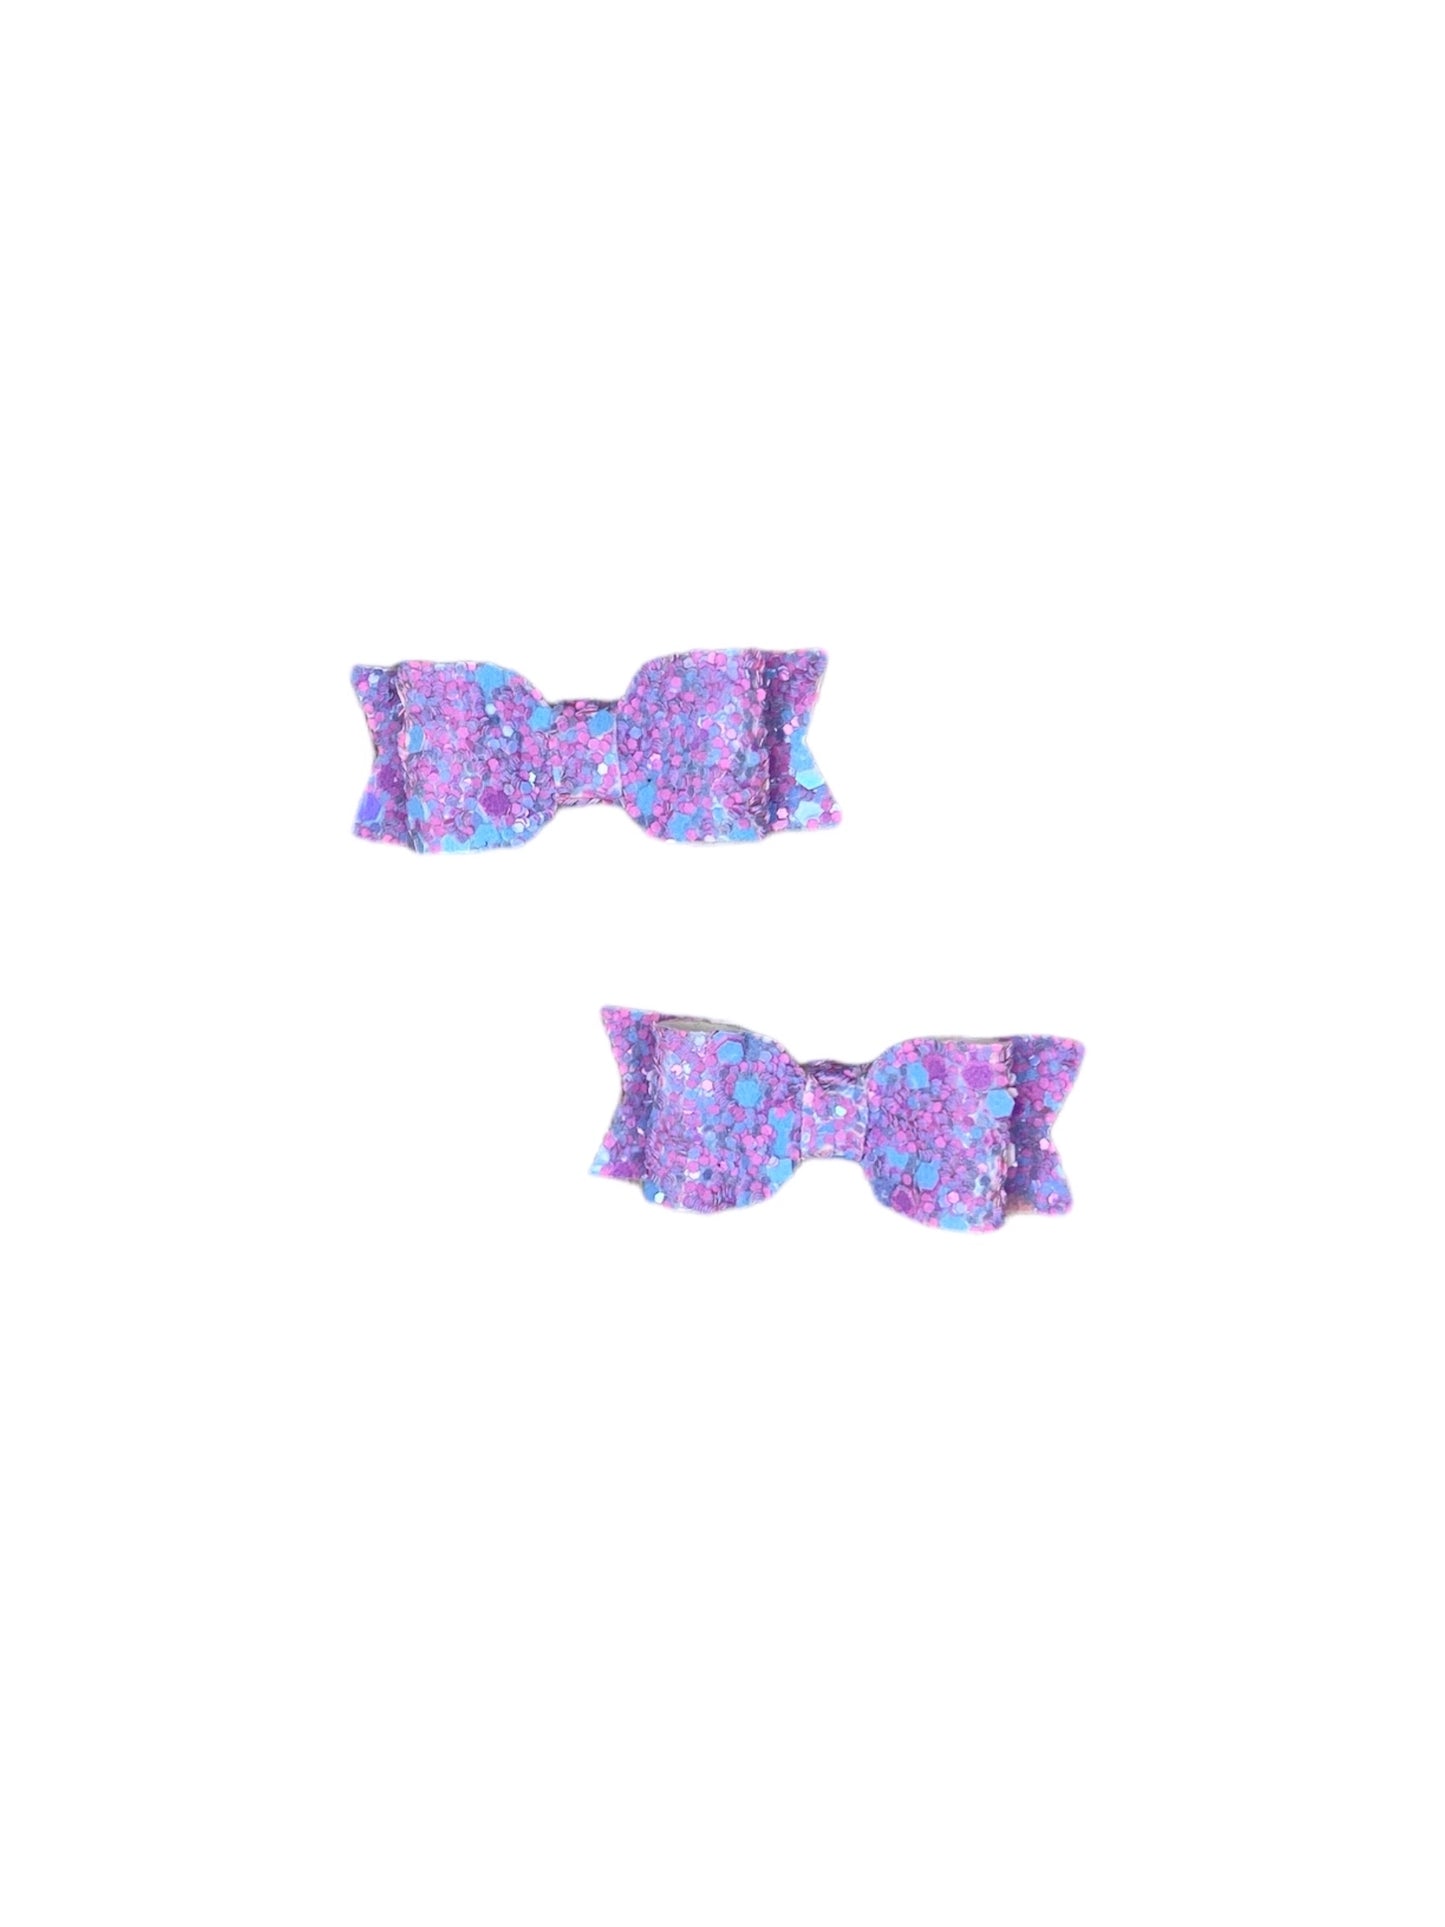 Purple and Blue Glitter Micro Pigtail Bows!